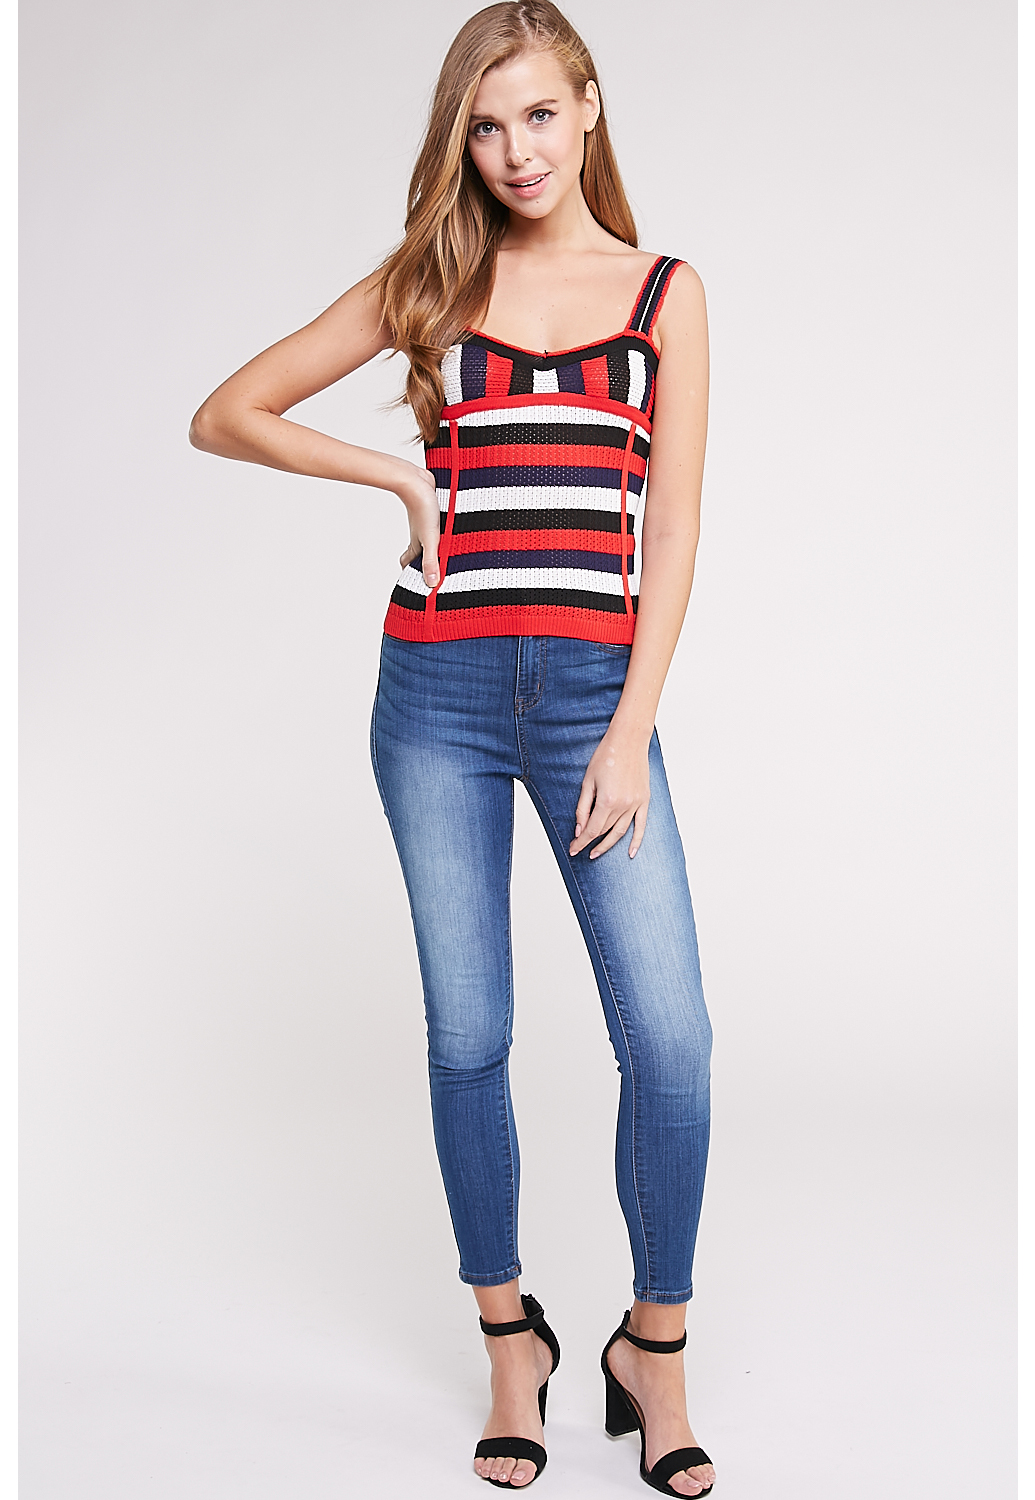 Knit Striped Casual Top